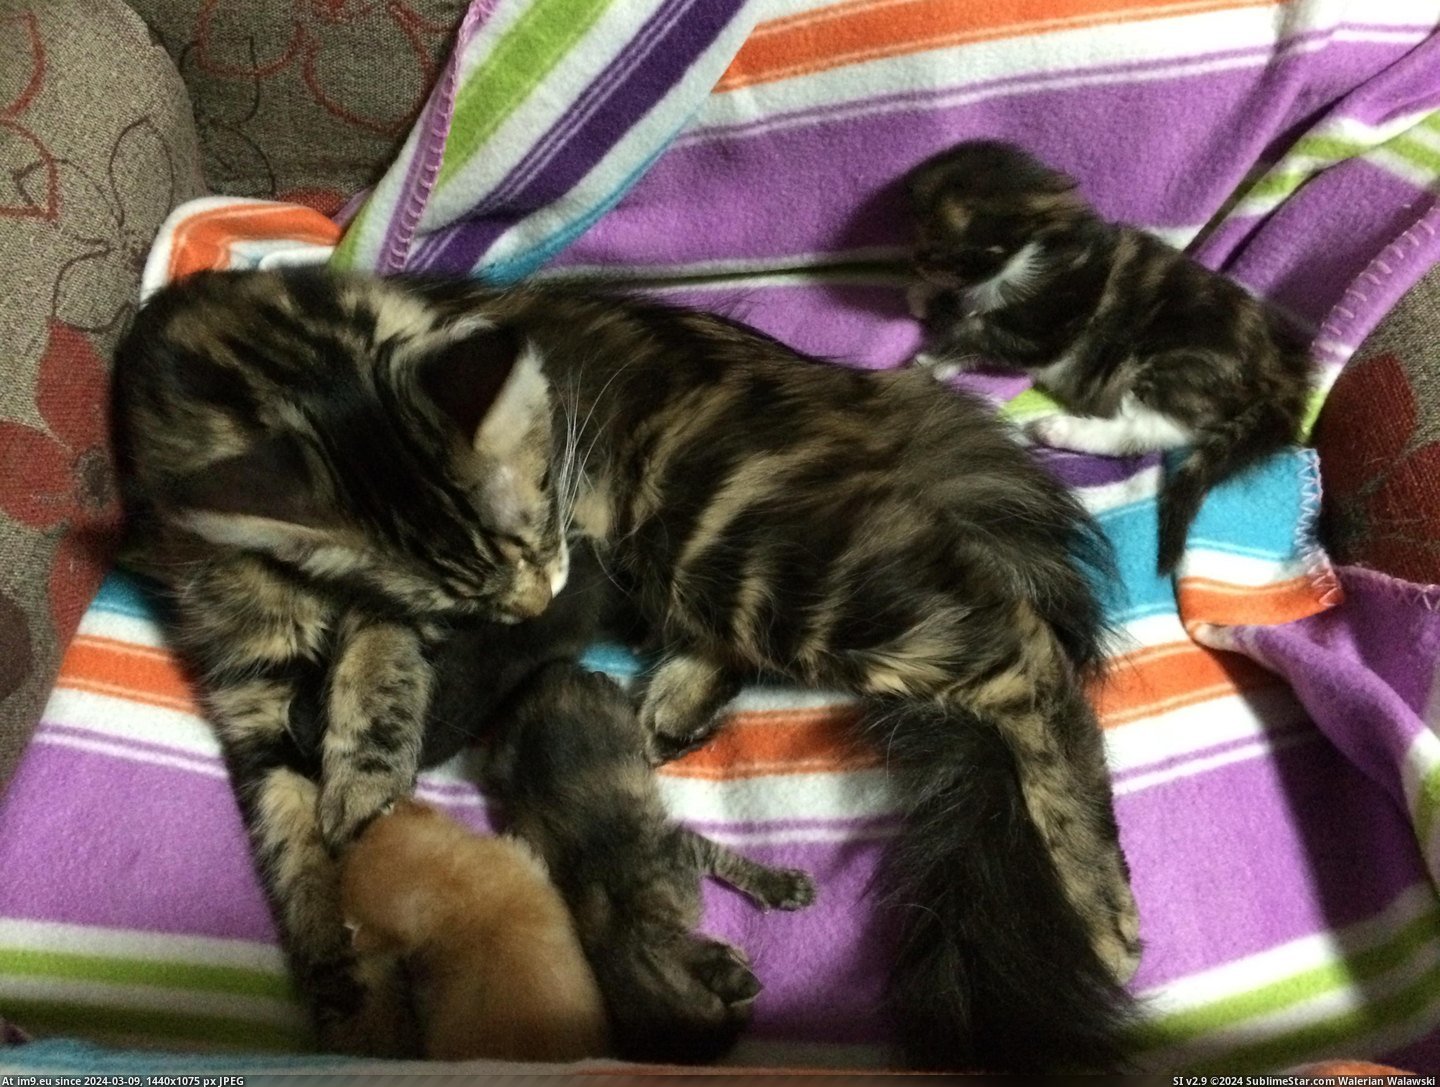 #Cats #Great #Kitten #Local #Choice #Coon #Momma #Abandoned #Kittens #Shelter #Maine [Cats] My Maine Coon momma only had 1 kitten, a local shelter had 3 abandoned kittens; we made a great choice. Pic. (Image of album My r/CATS favs))